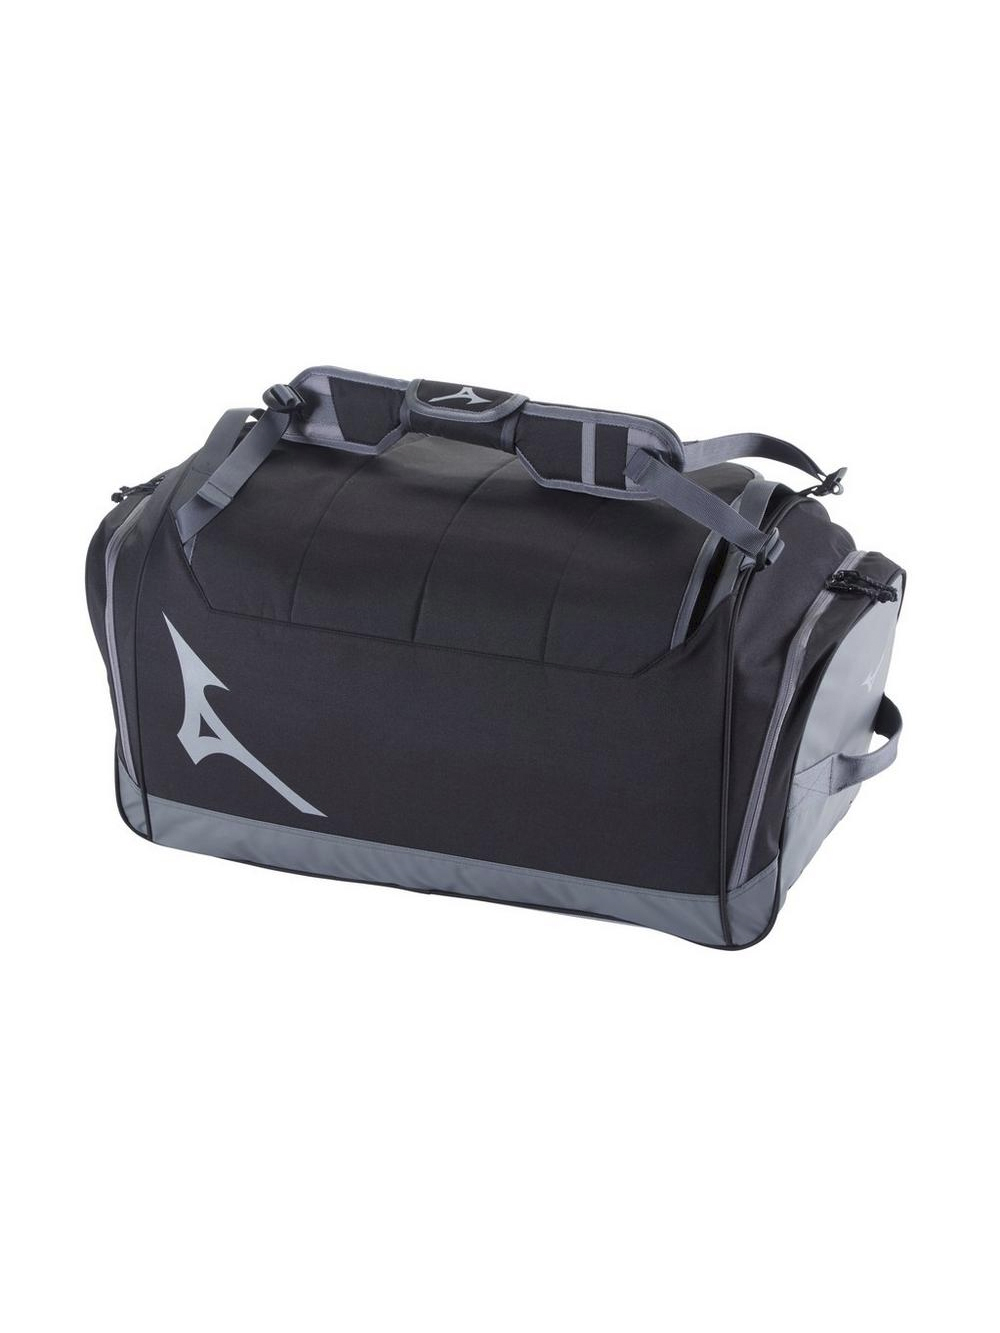 Mizuno Team Duffle | Midwest Volleyball Warehouse